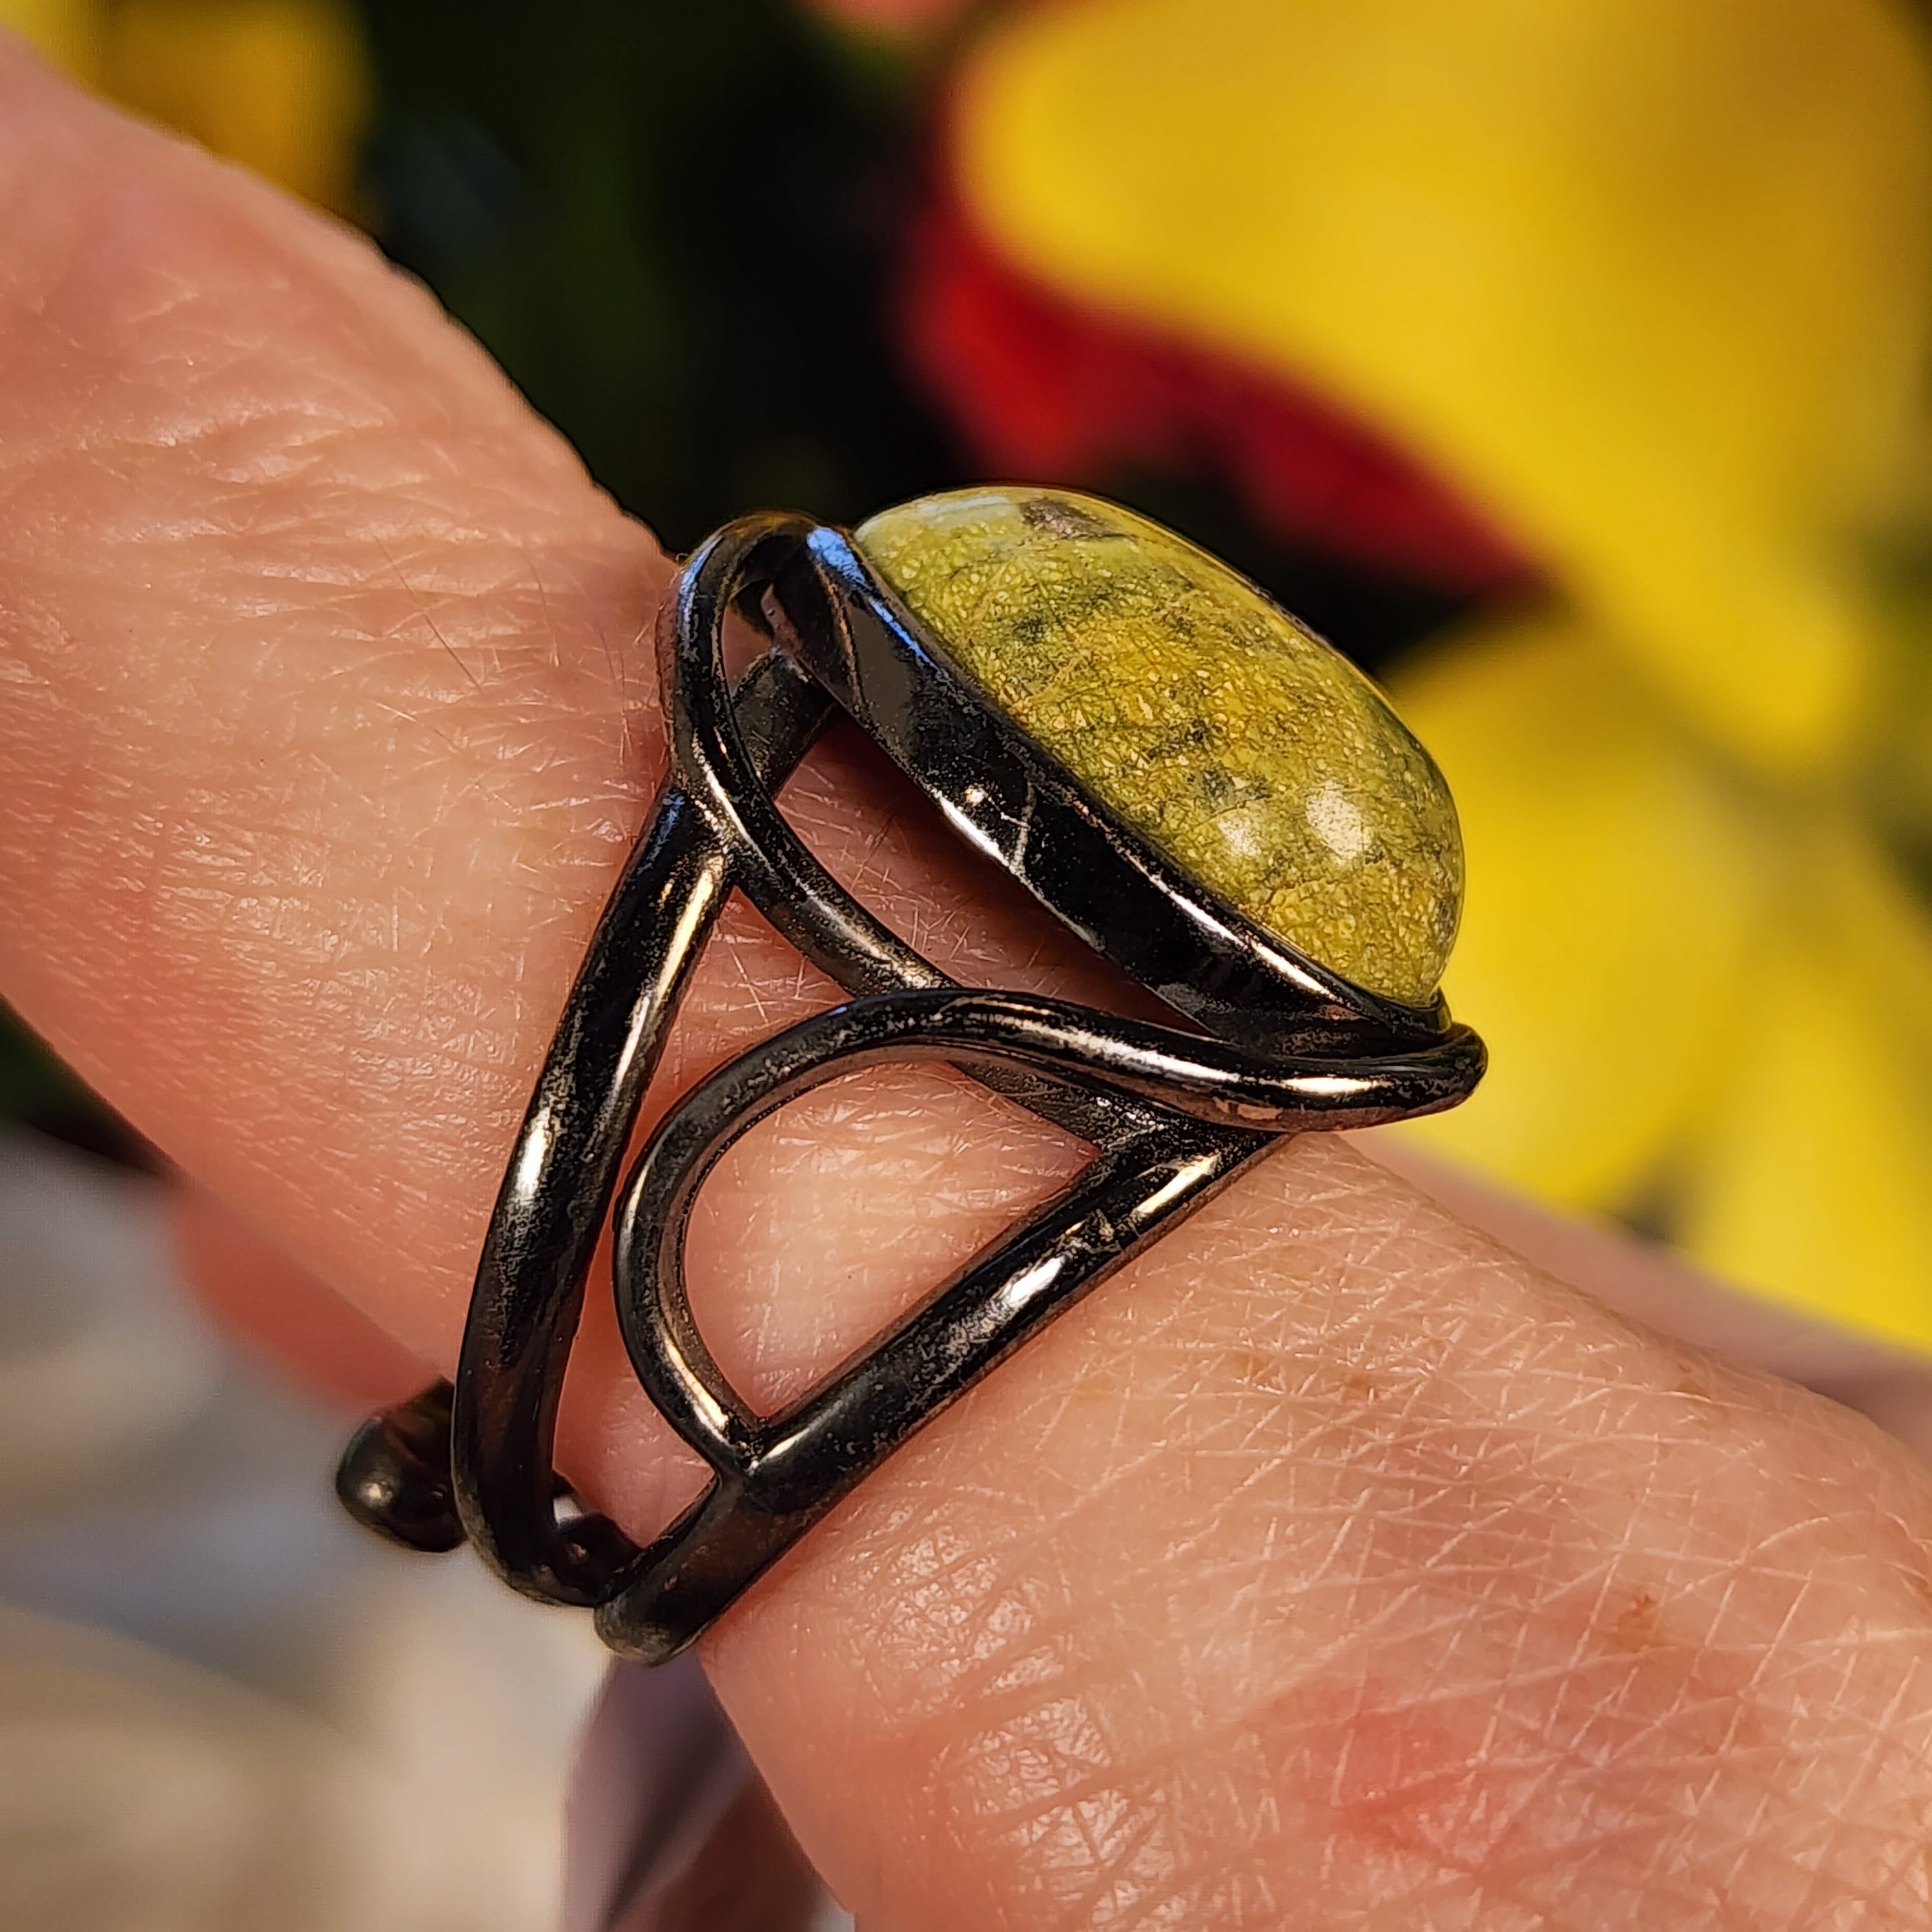 Atlantisite Stichtite in Serpentine Finger Cuff Adjustable Ring .925 Silver with Rhodium Plating for Emotional Maturity, Inner Peace and Improved Self Esteem